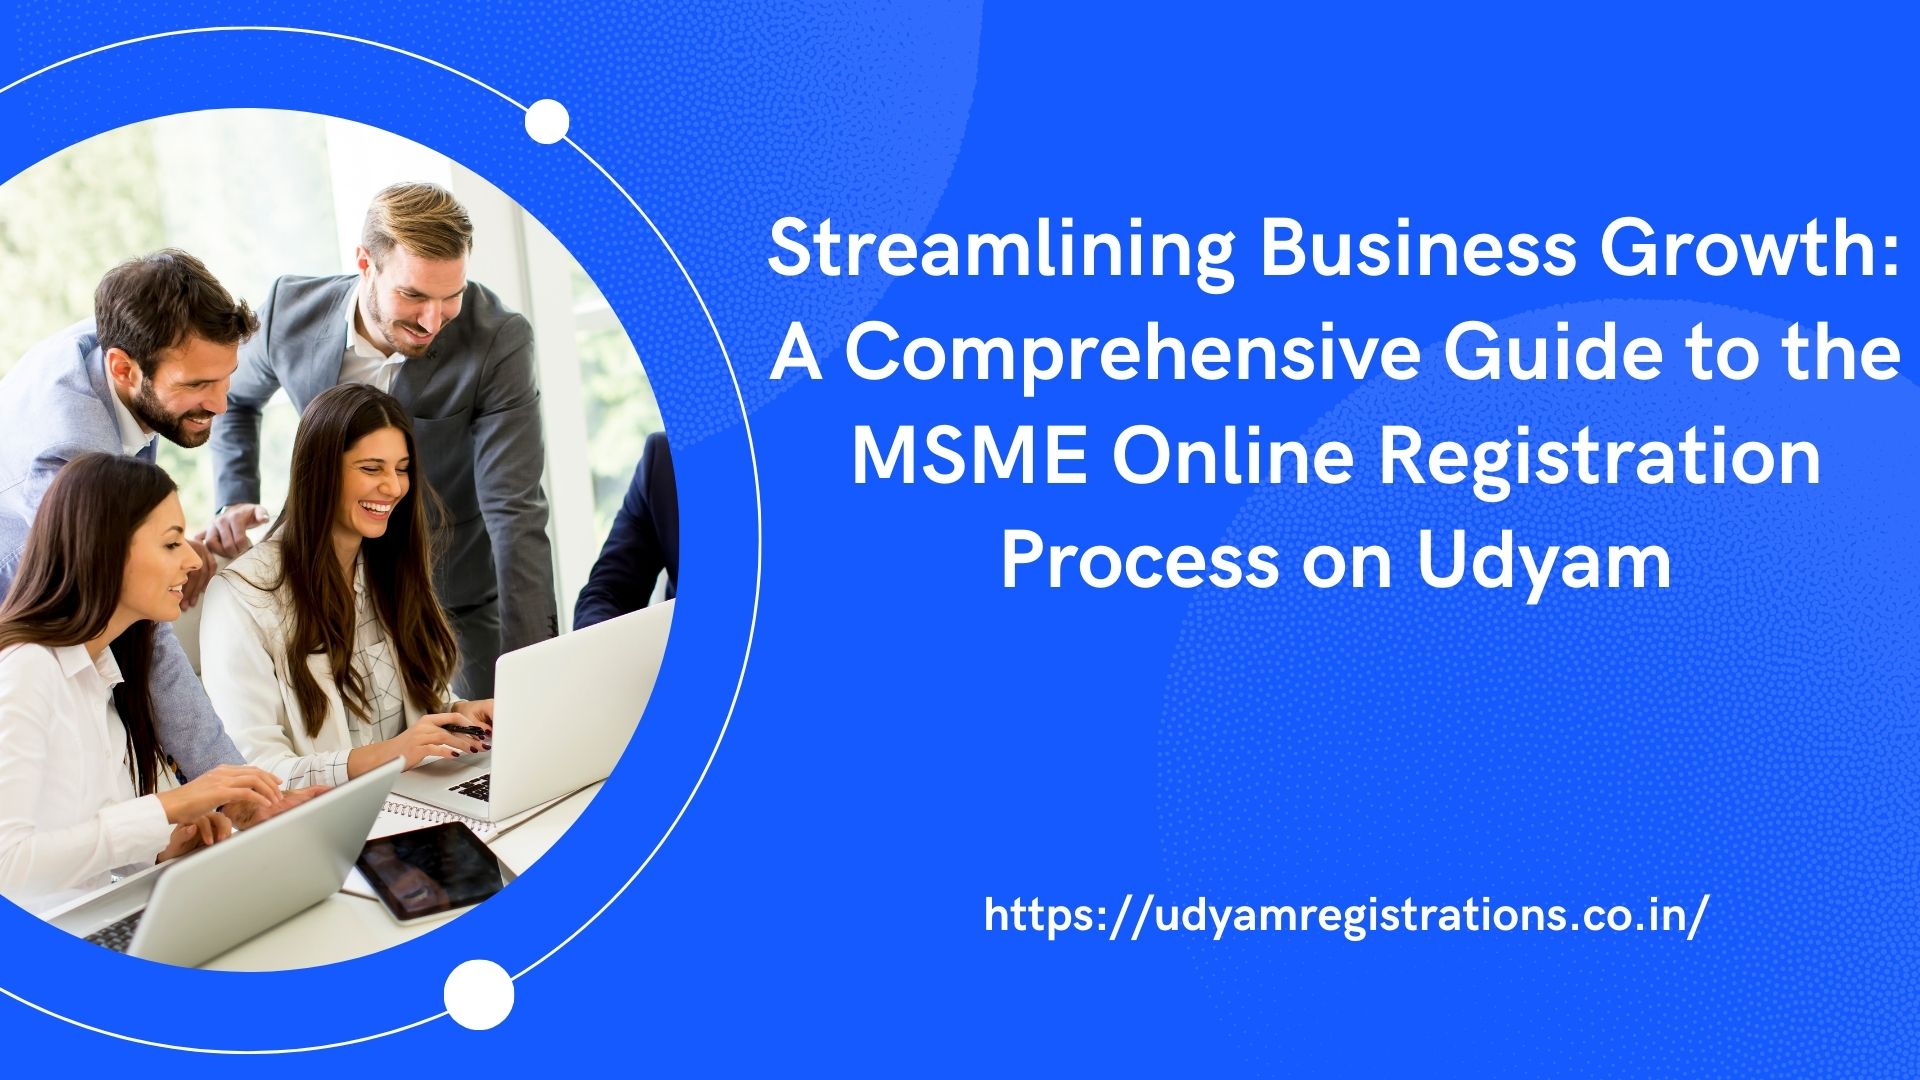 A Comprehensive Guide to the MSME Online Registration Process on Udyam